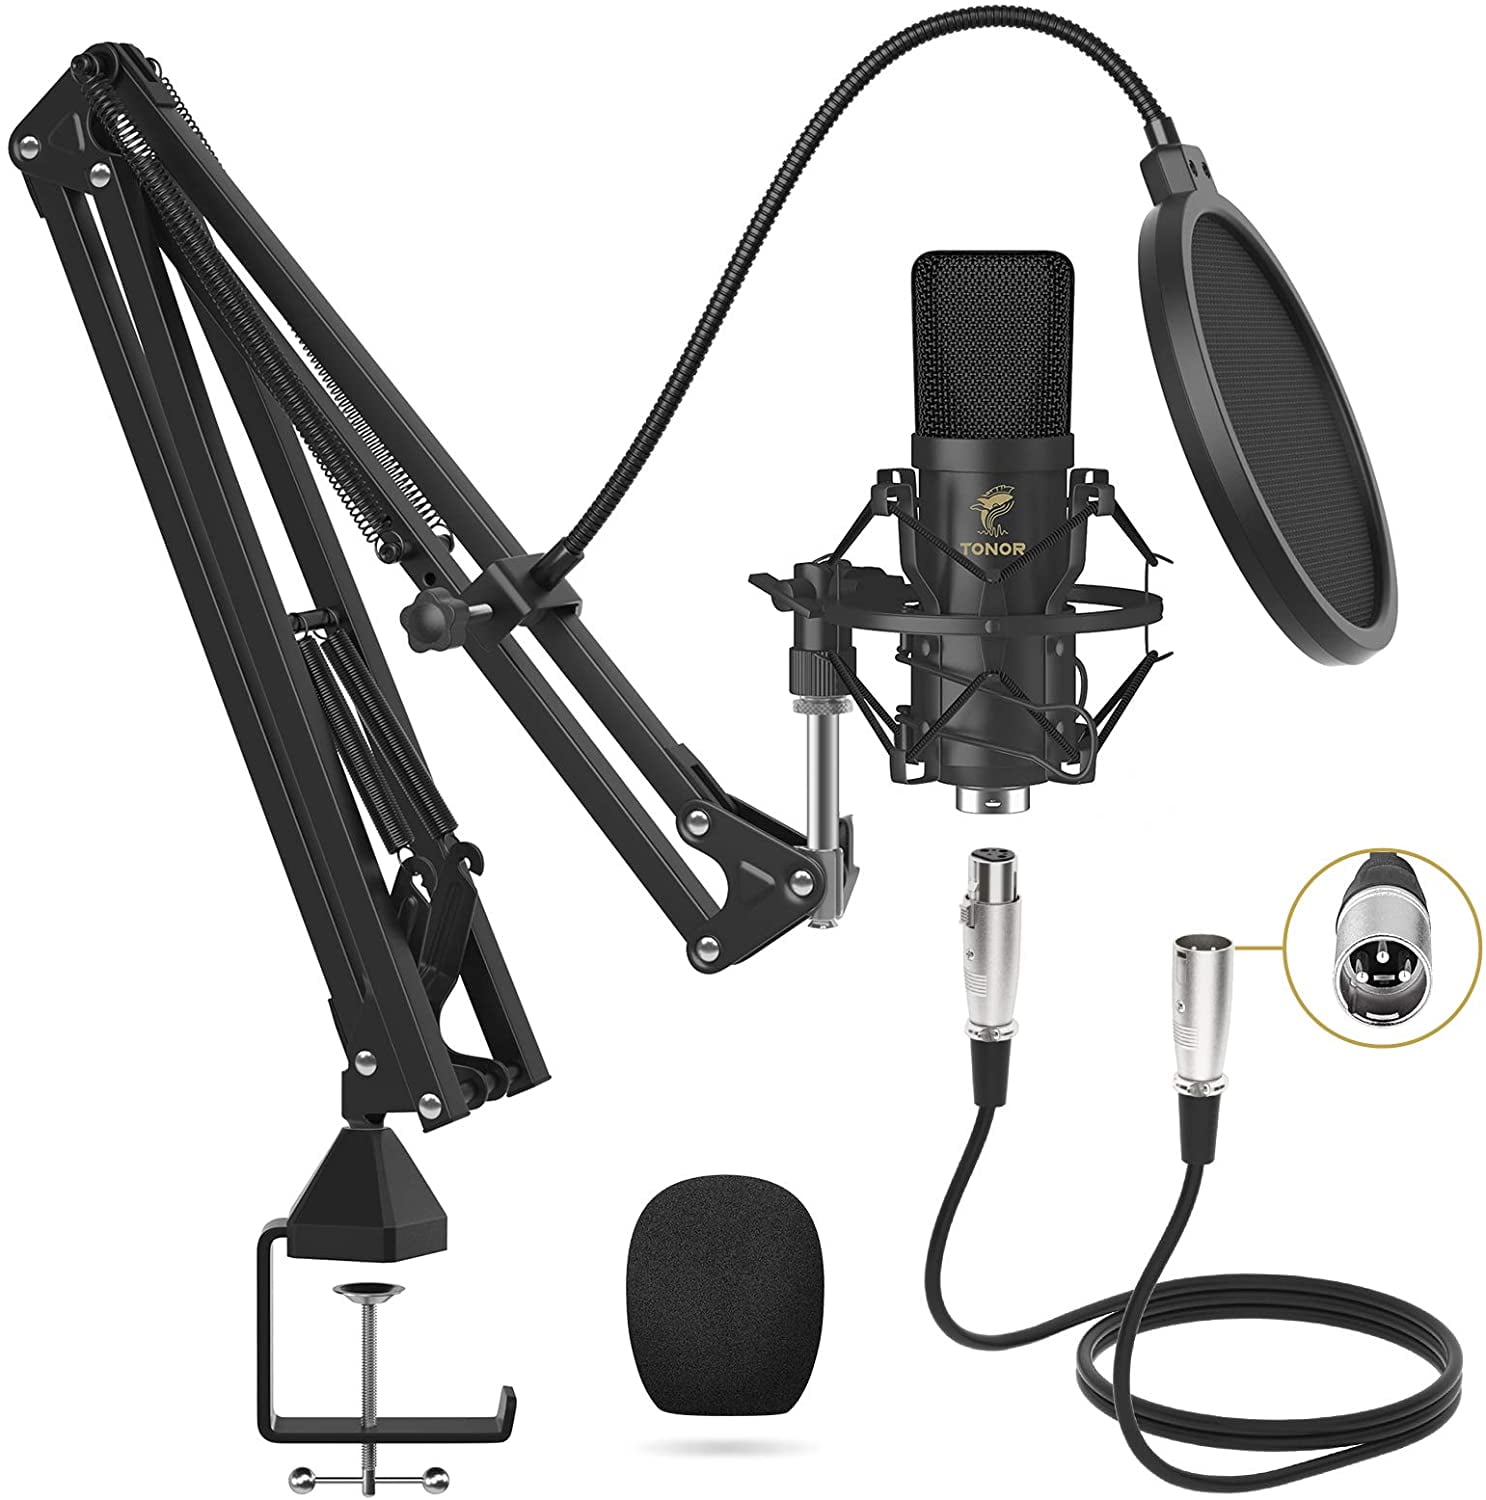 Games and YouTube Videos Mugig Condenser Microphone XLR Cable and Pop Filter for Recording Adjustable Microphone Stand Podcast Voice Overs Professional Studio Microphone with Shock Mount